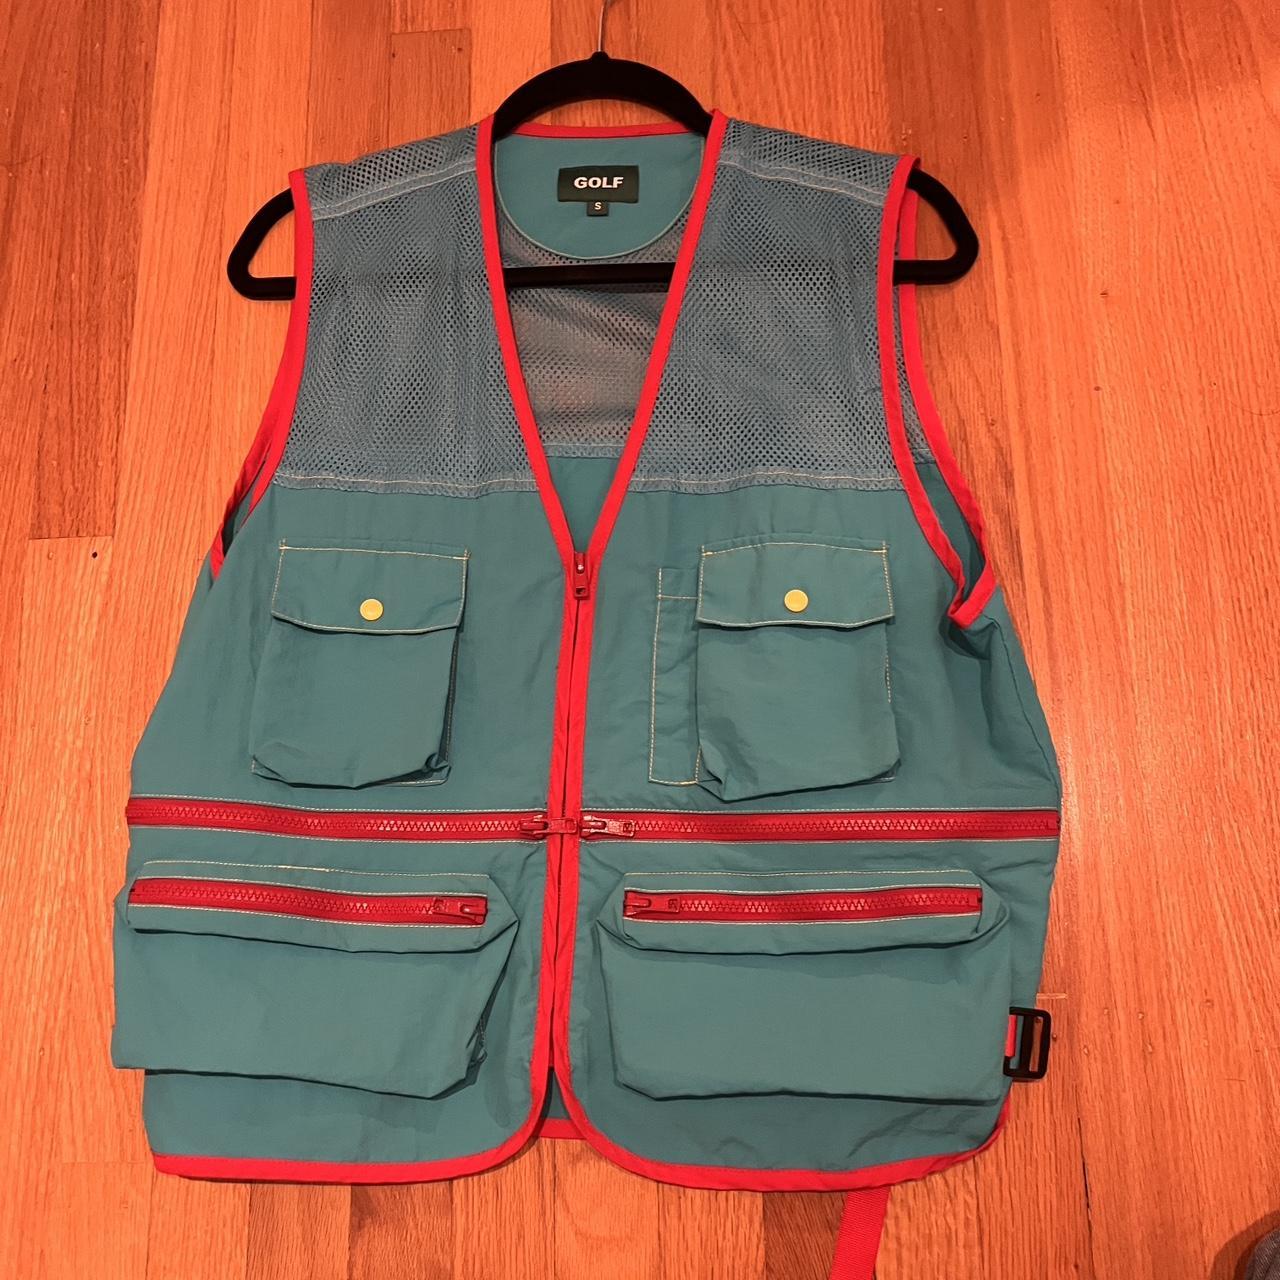 Cargo Fishing Vest Olive green and black with - Depop